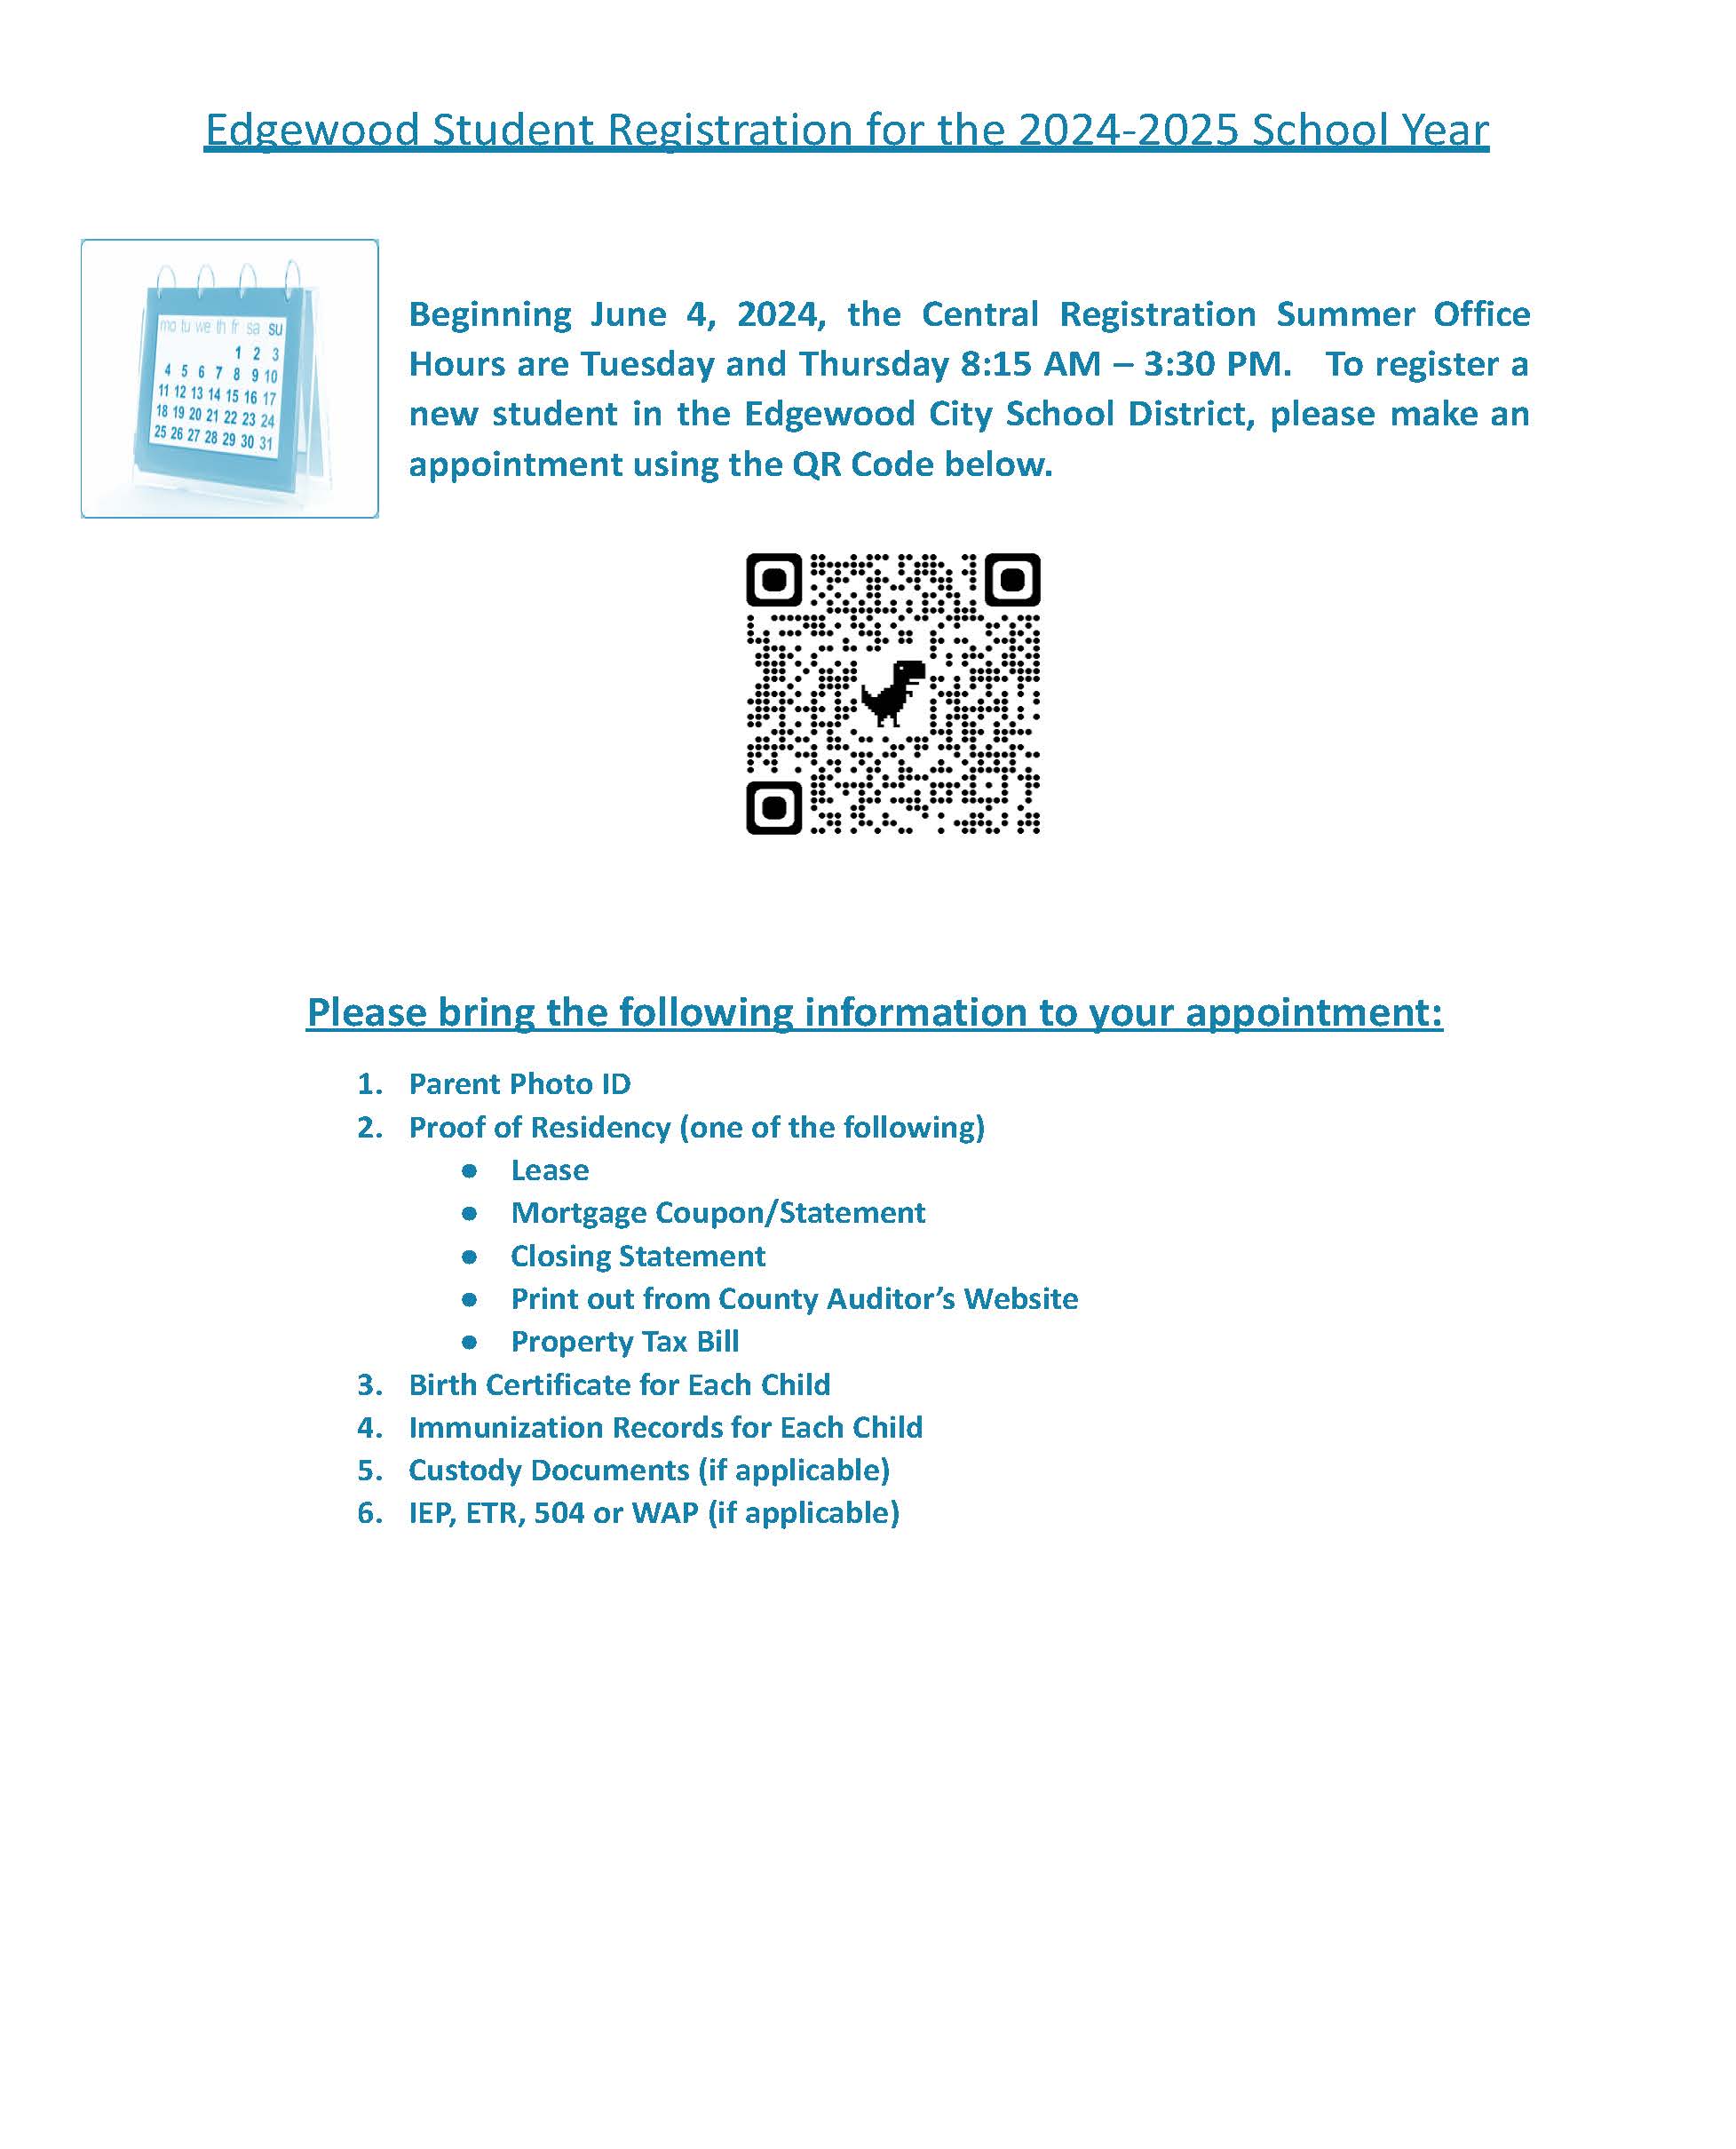 flyer with info  Beginning June 4, 2024, the Central Registration Summer Office Hours are Tuesday and Thursday 8:15 AM – 3:30 PM.   To register a new student in the Edgewood City School District, please make an appointment using the QR Code below.   					       Please bring the following information to your appointment: Parent Photo ID Proof of Residency (one of the following) Lease Mortgage Coupon/Statement Closing Statement Print out from County Auditor’s Website Property Tax Bill Birth Certificate for Each Child Immunization Records for Each Child Custody Documents (if applicable) IEP, ETR, 504 or WAP (if applicable)